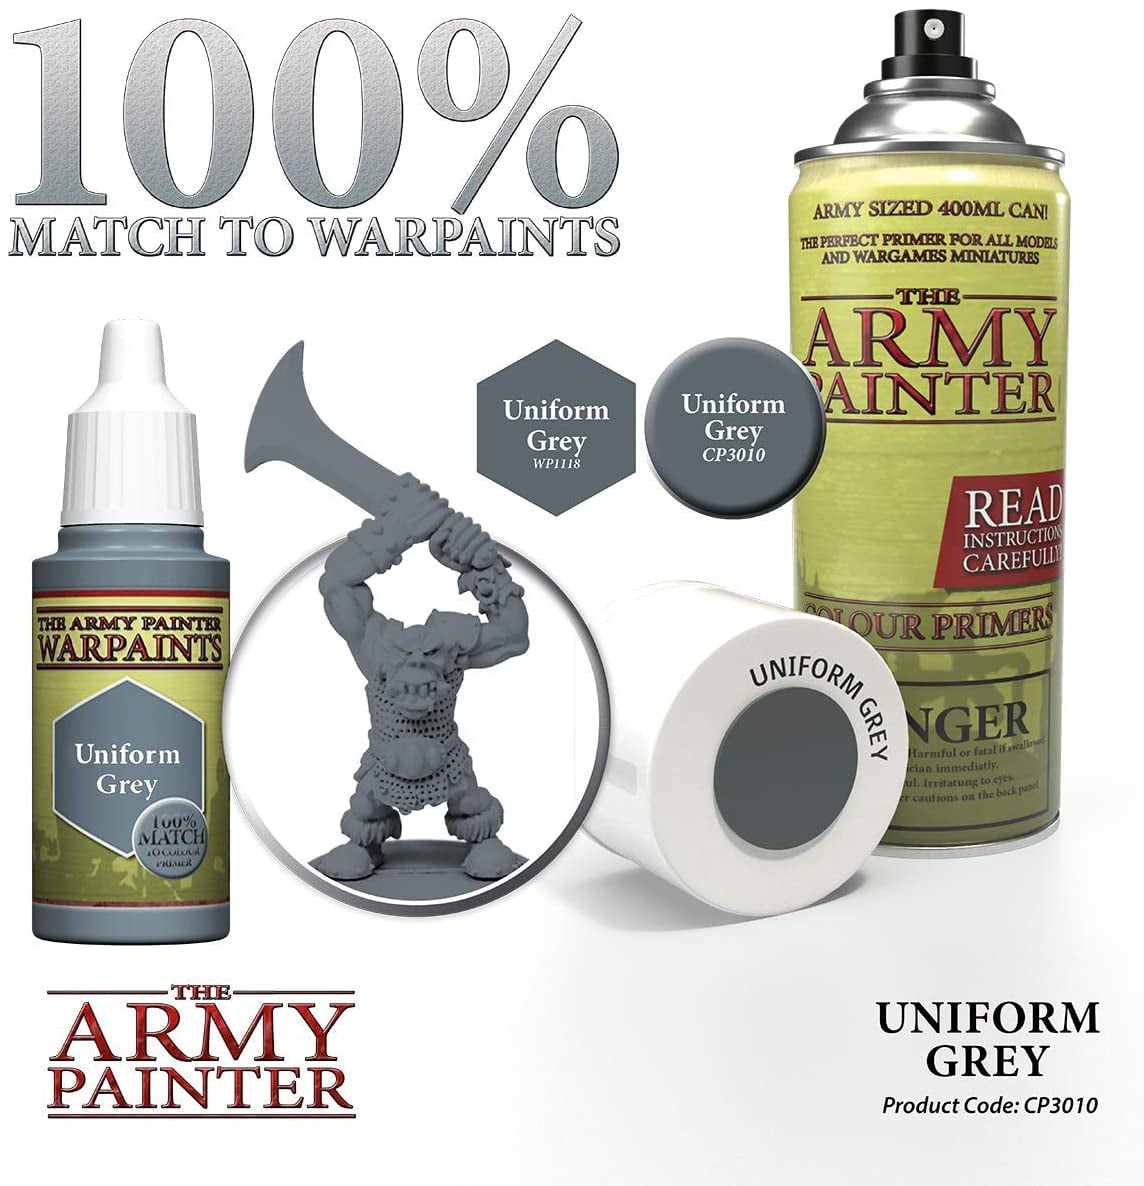 Anything good for stripping army painter primer? Tbh it's not too